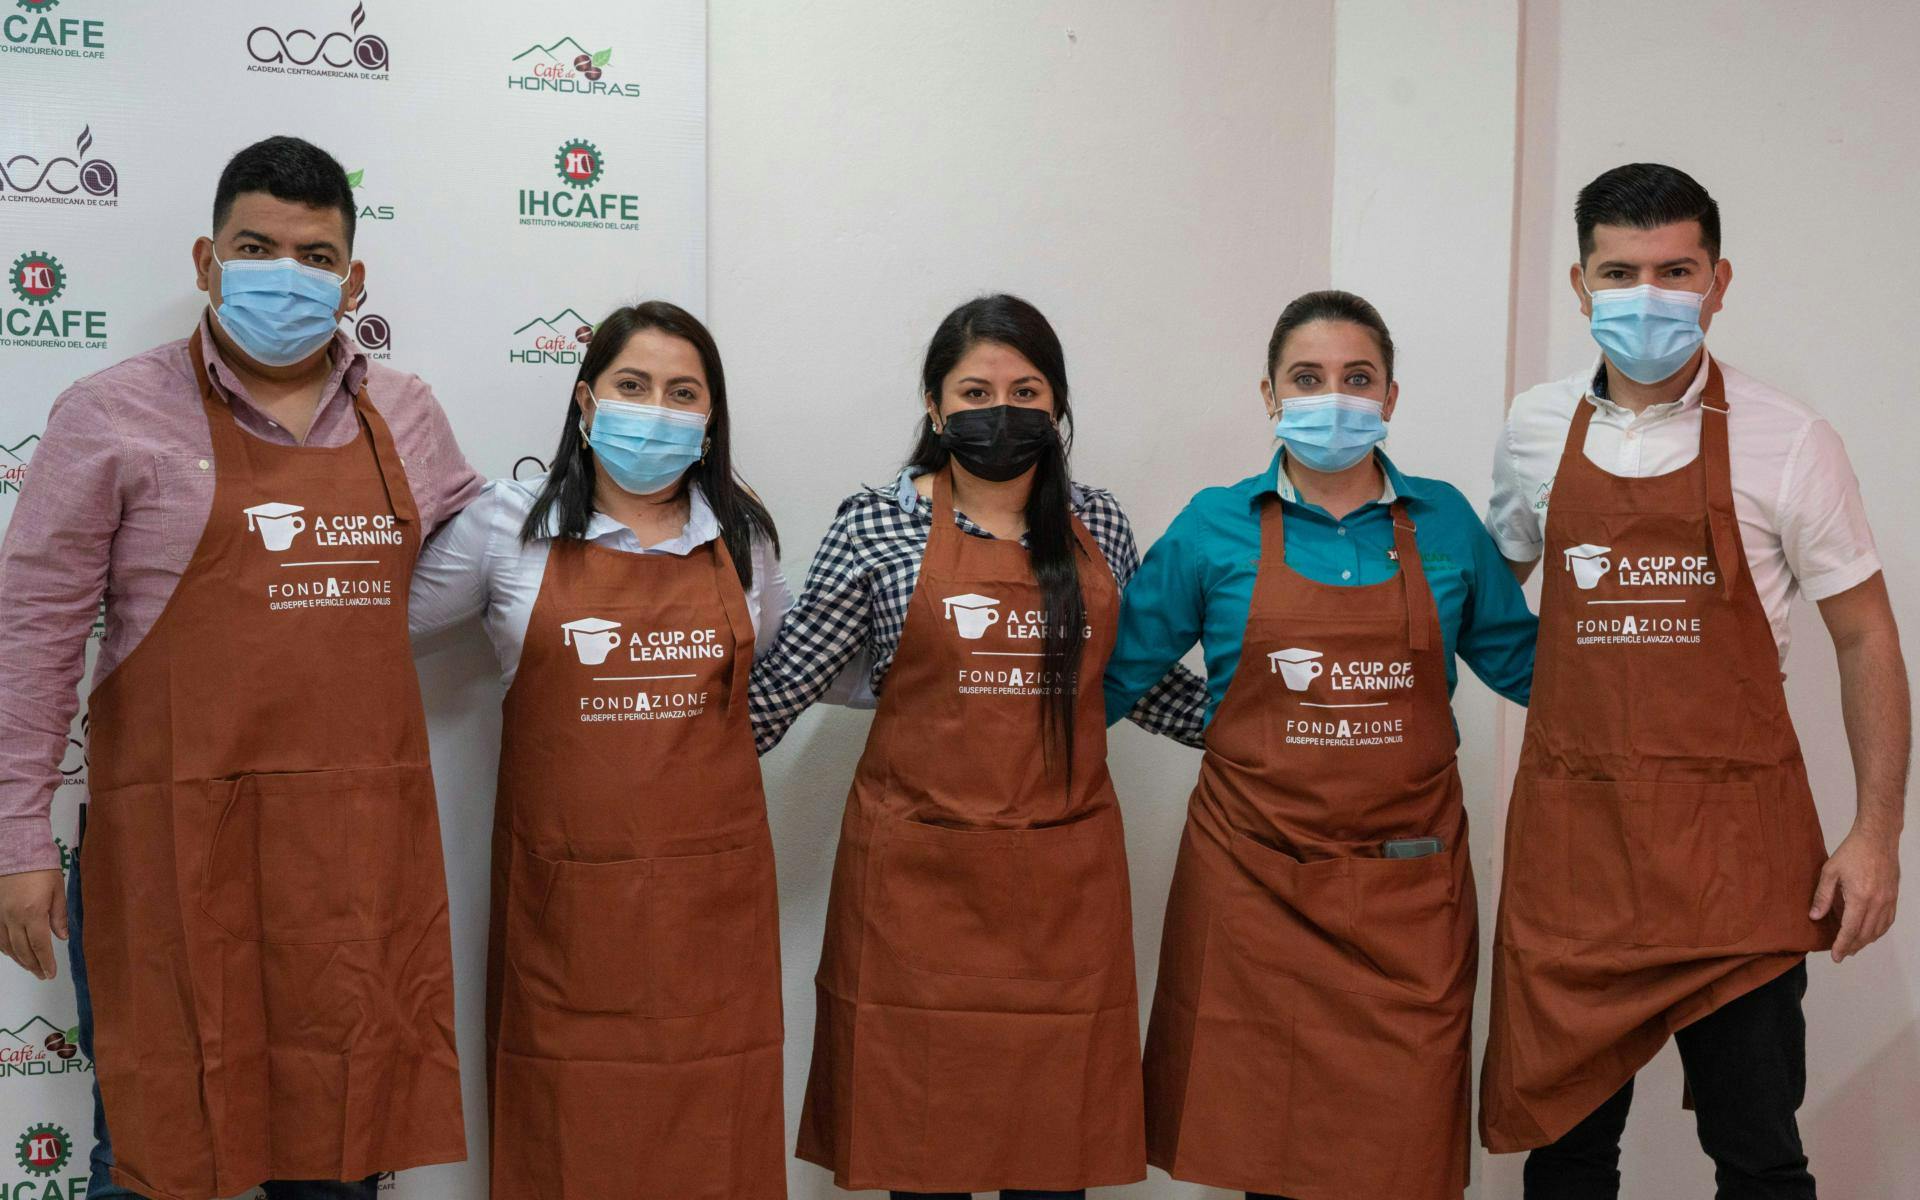 A Cup of Learning: Youth Coffee Training Program in Honduras